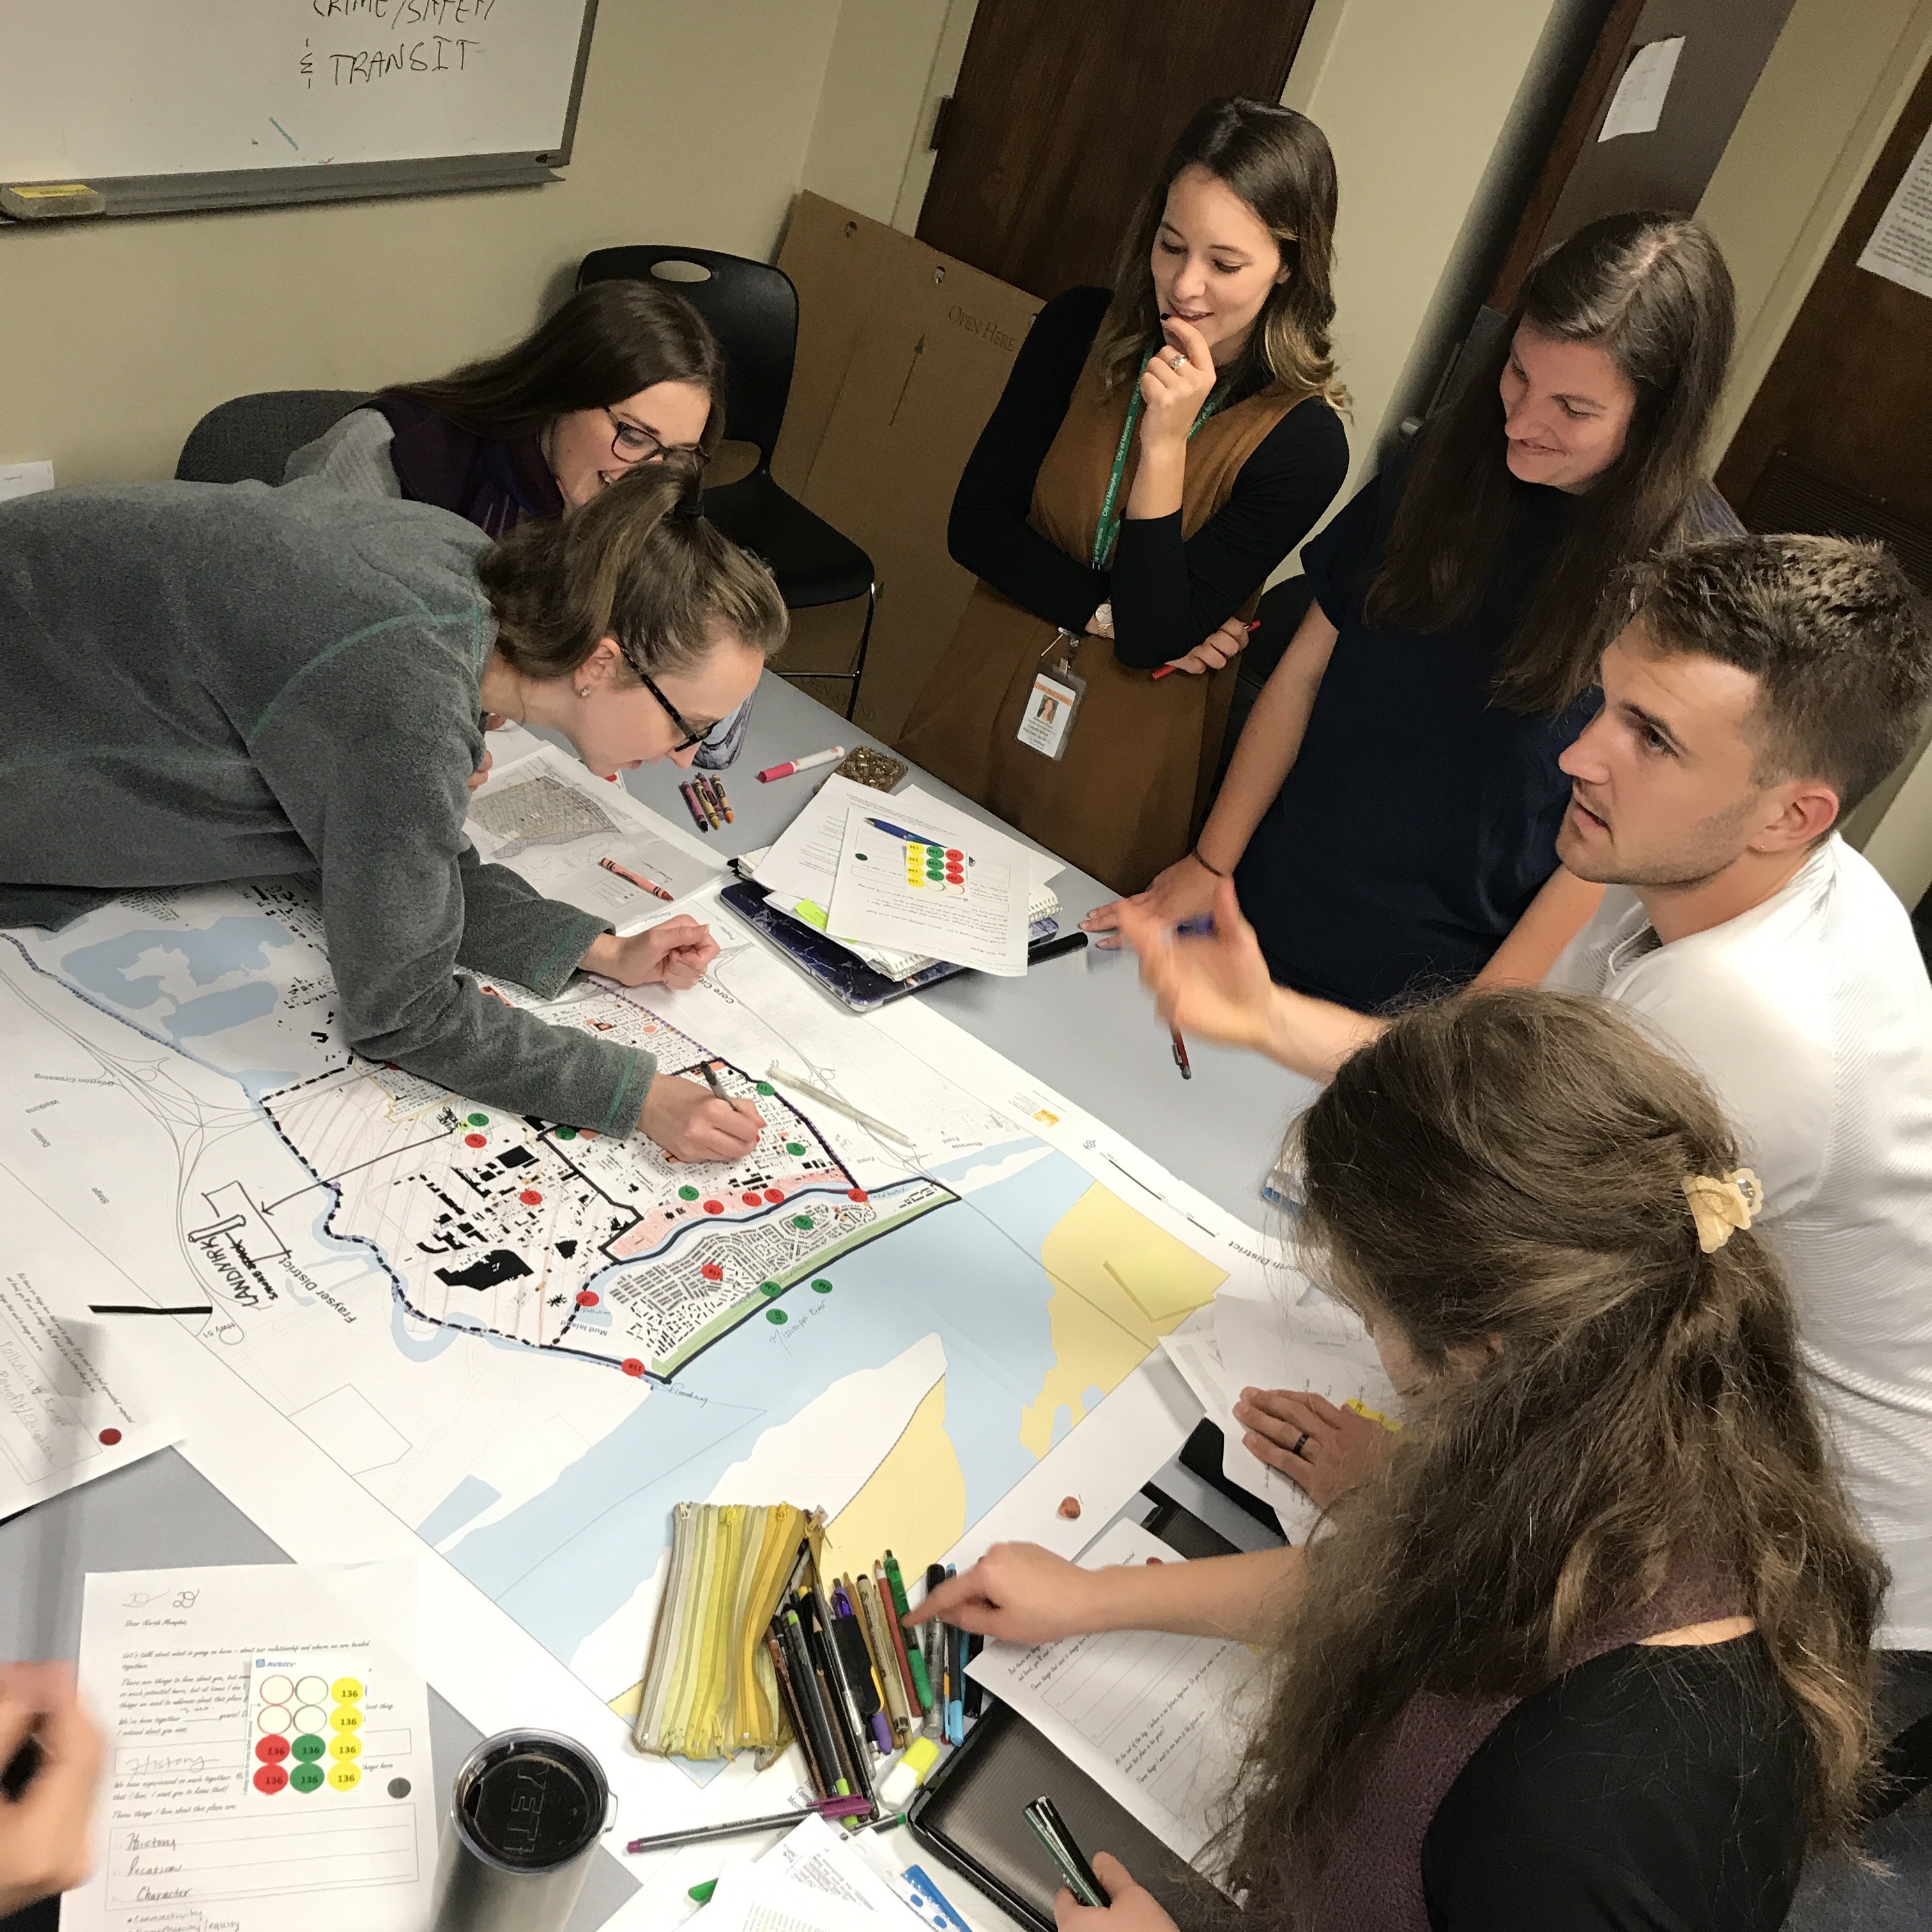 Graduate students at the Department of City and Regional Planning at the University of Memphis use asset mapping to mark areas of great significance in neighborhoods, as expressed by neighborhood residents during community engagement processes.